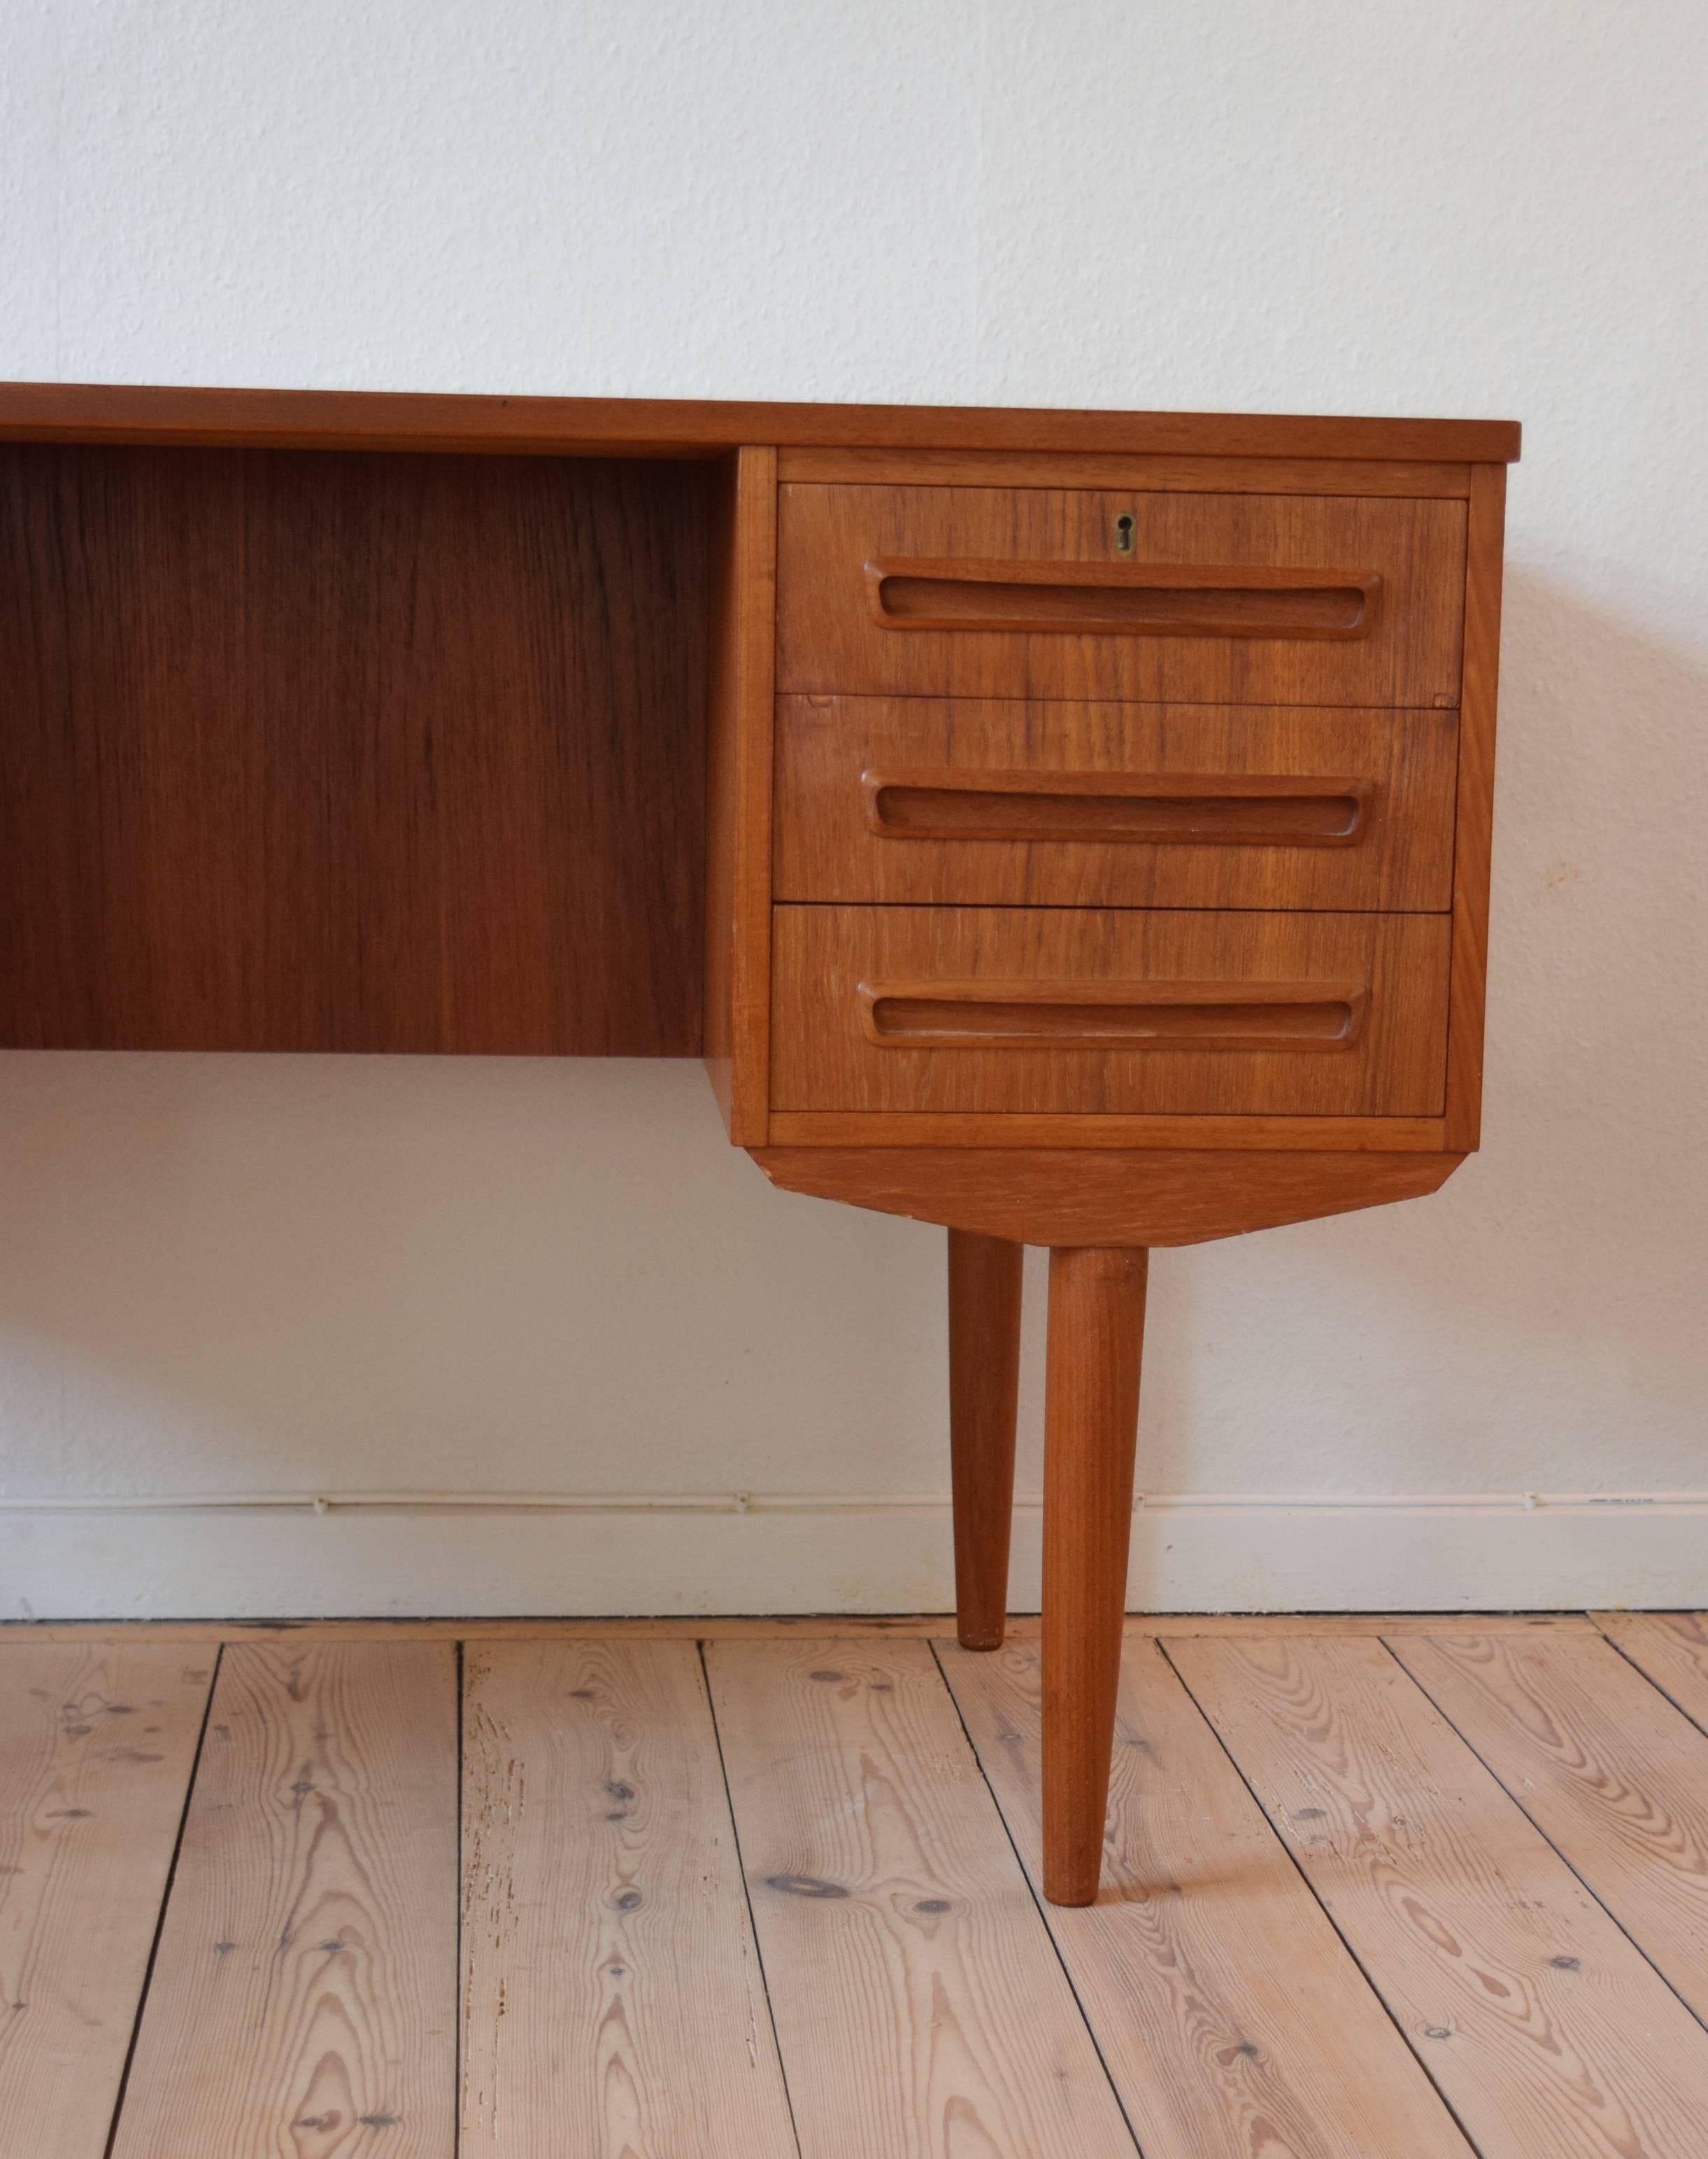 Teak desk designed by J. Svenstrup for A.P. Møbler, Denmark in the 1960s. Desk features six drawers (two lockable) on the front, and shelves on the back side. Very few marks on this item considering it's vintage. Top plate has been refinished and